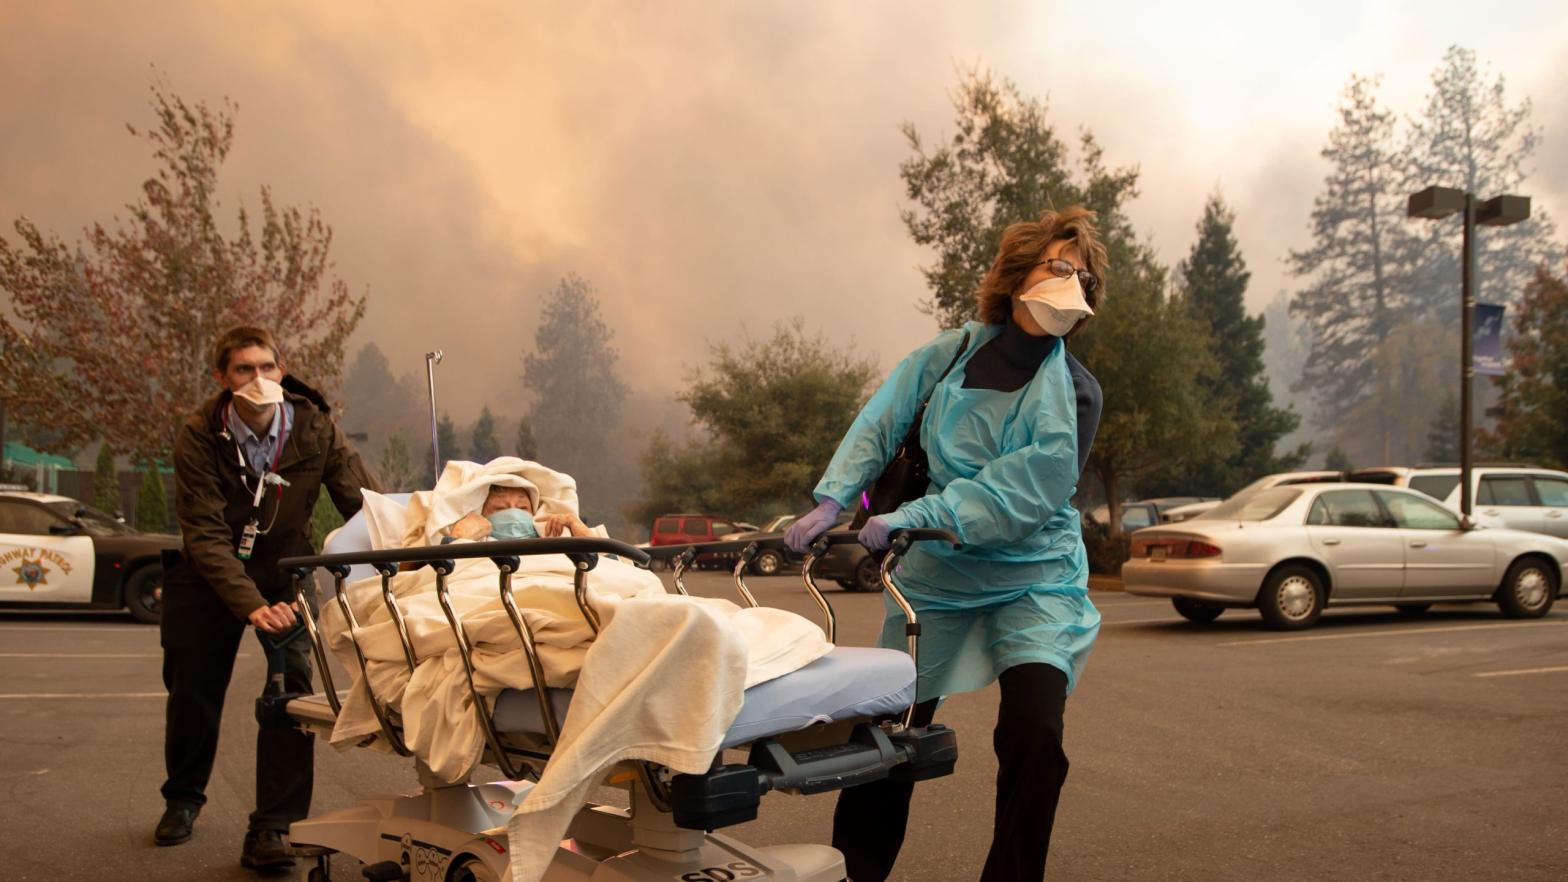 Patients are quickly evacuated from the Feather River Hospital as it burns down during the Camp fire in Paradise, California on Nov. 8, 2018. (Photo: Josh Edelson/AFP, Getty Images)